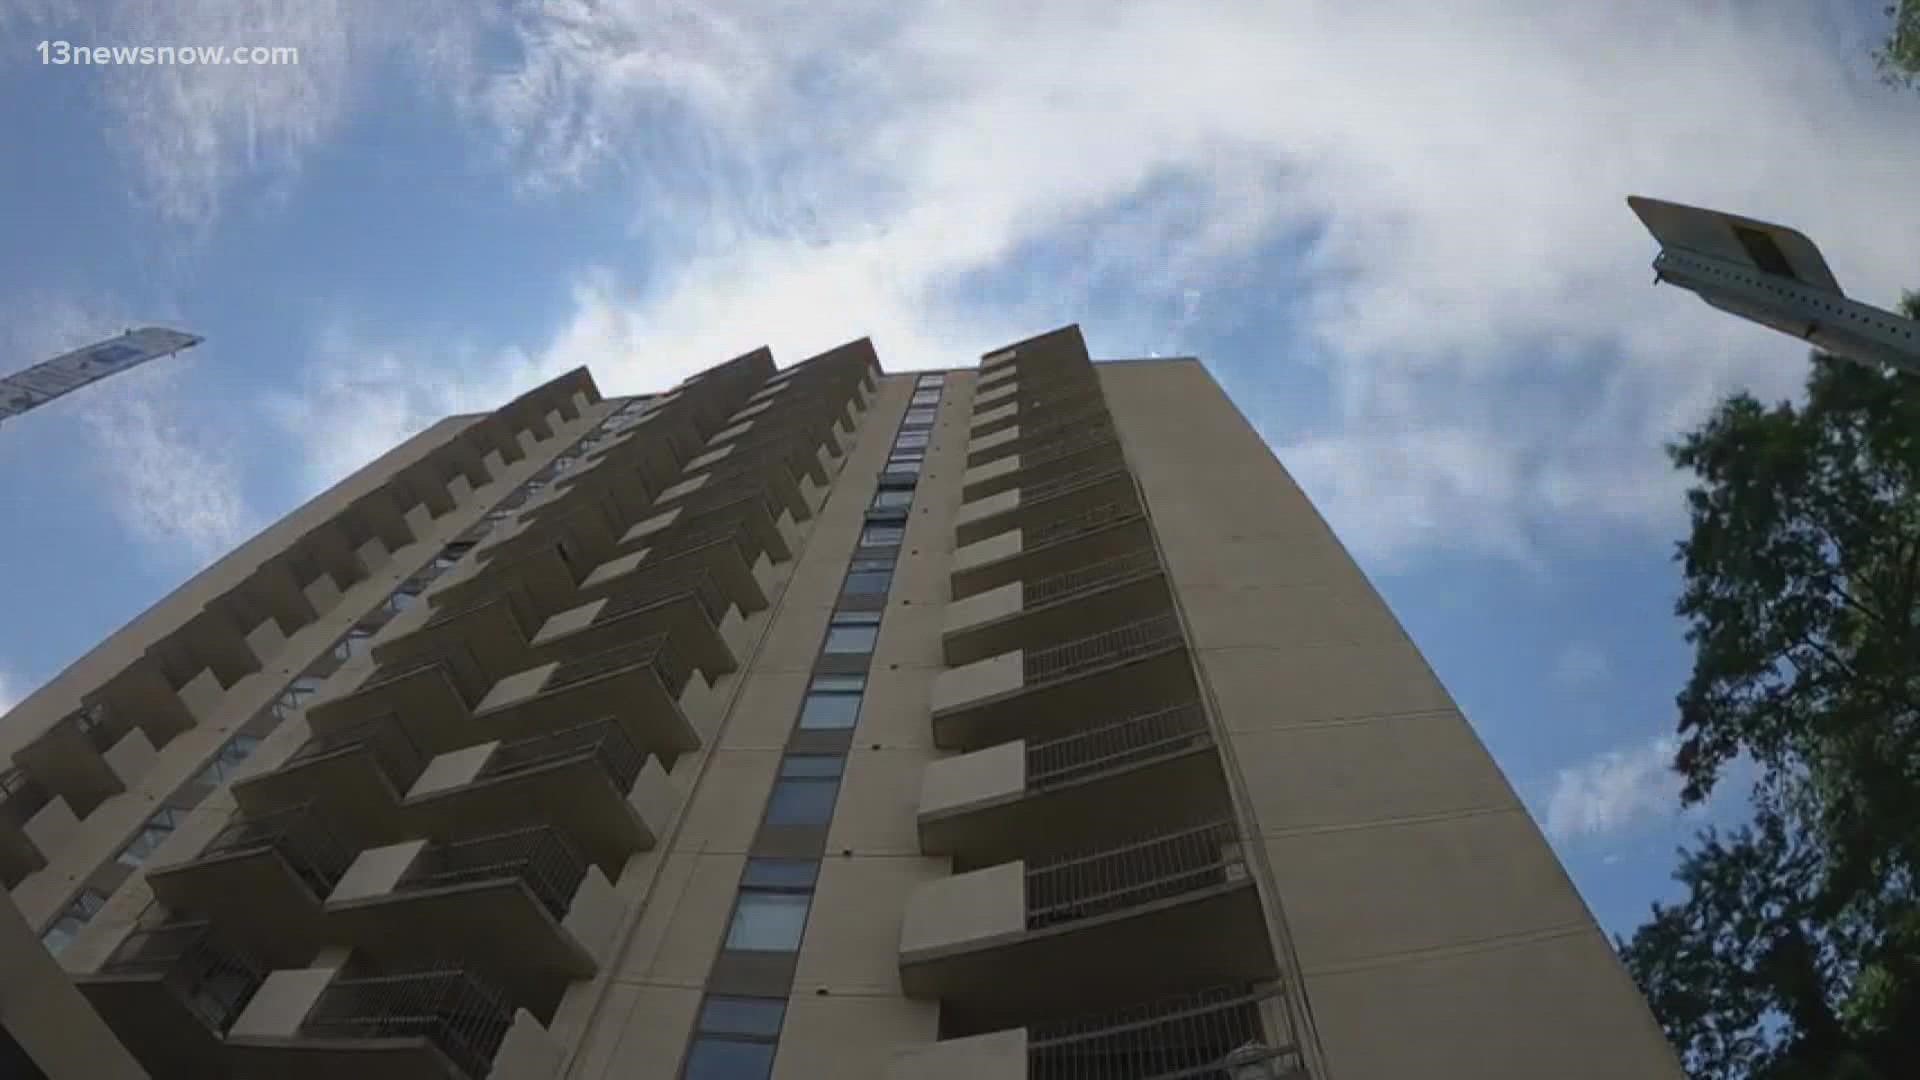 New lawsuits claim the problems at the condemned high-rise apartments in Newport News started years ago.